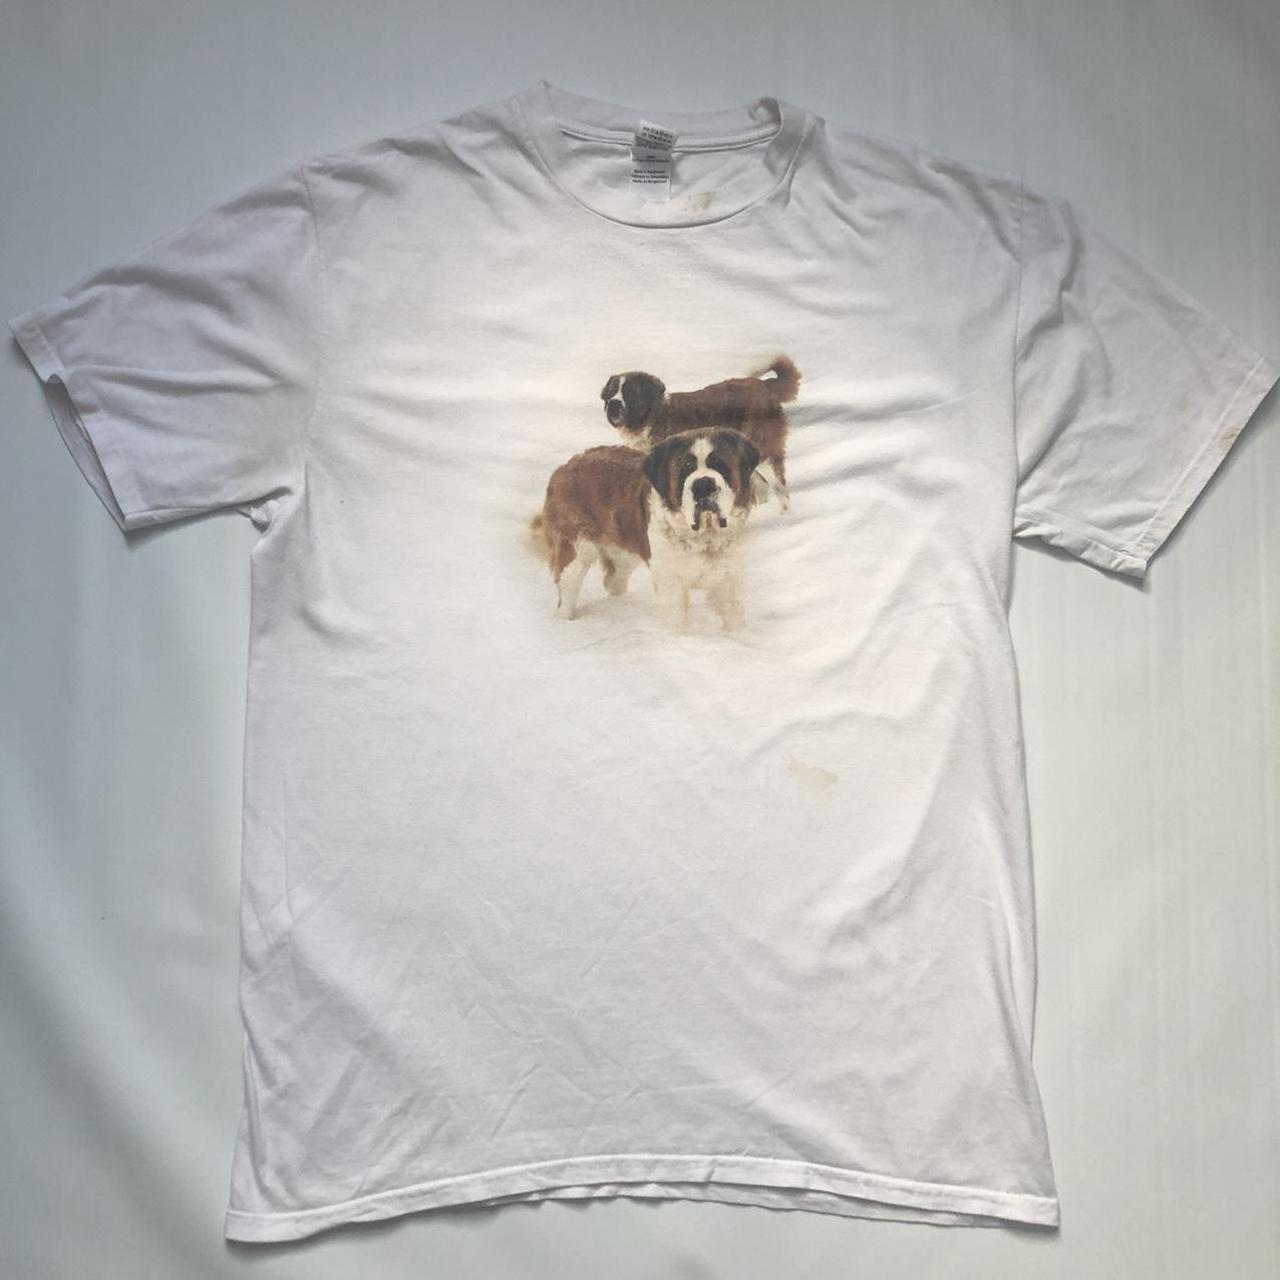 Product Image 1 - Vintage Dog Graphic T-shirt. This